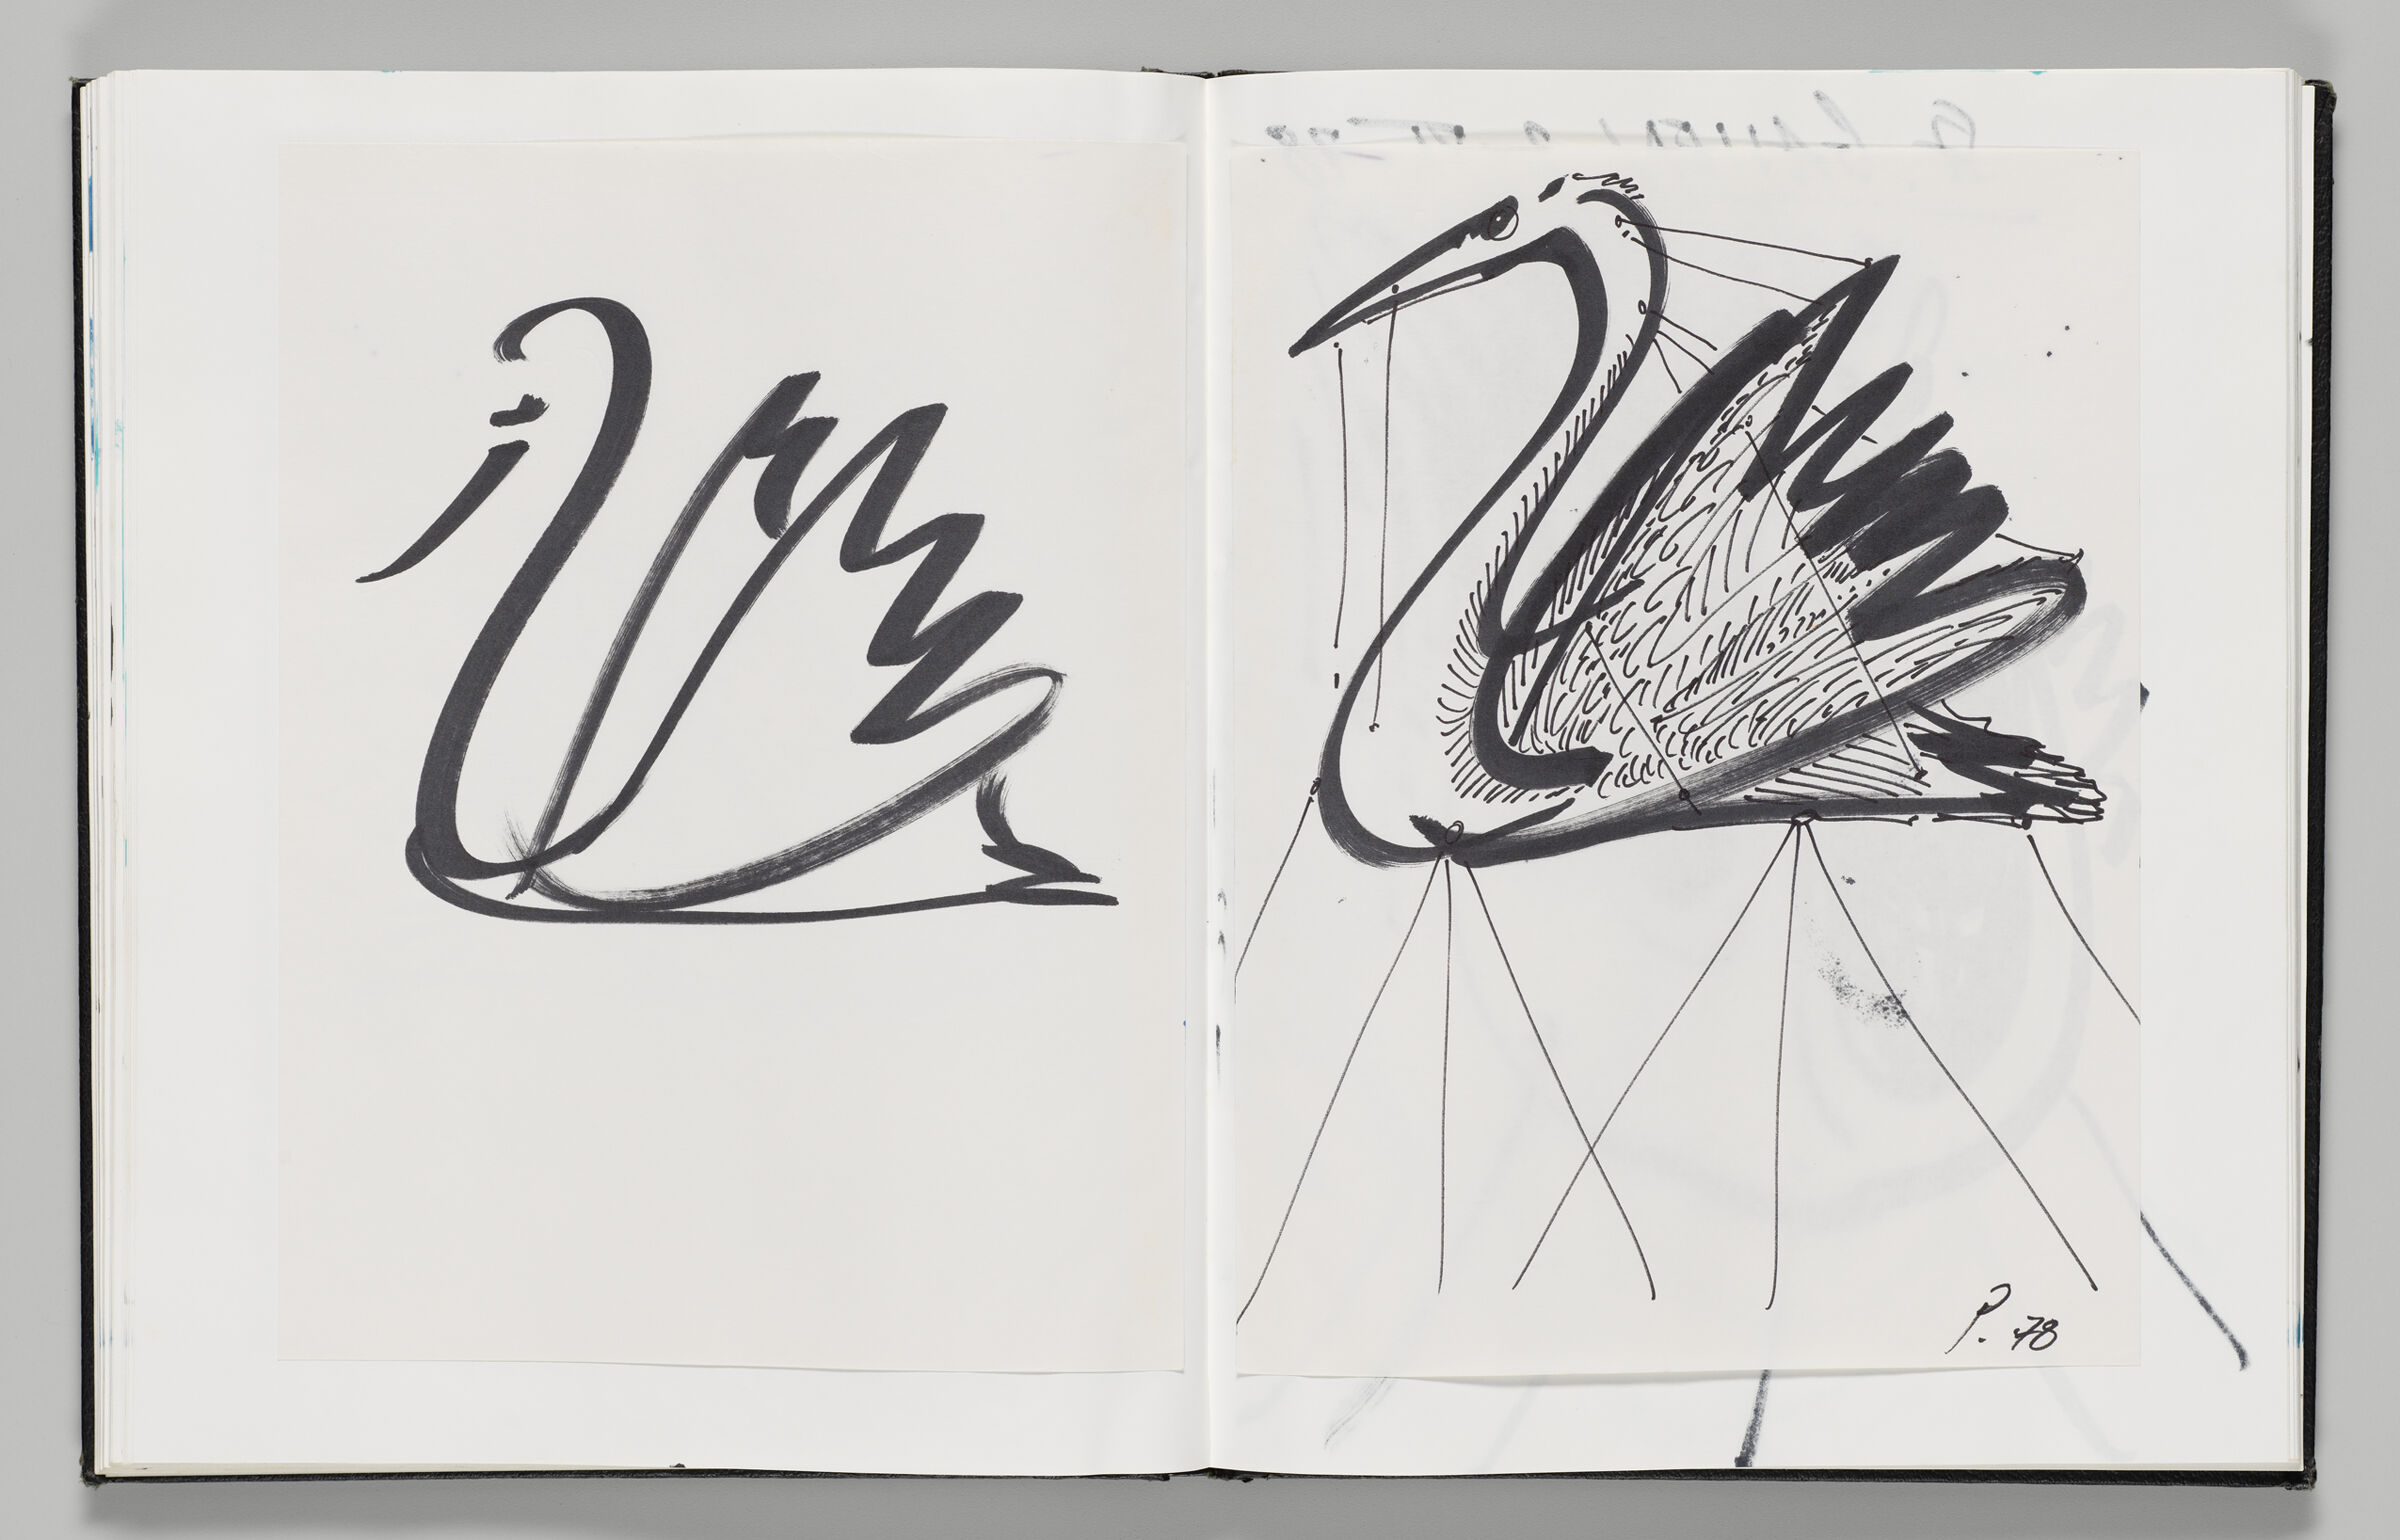 Untitled (Adhered Sketch Of Swan, Left Page); Untitled (Adhered Sketch Of Swan, Right Page)